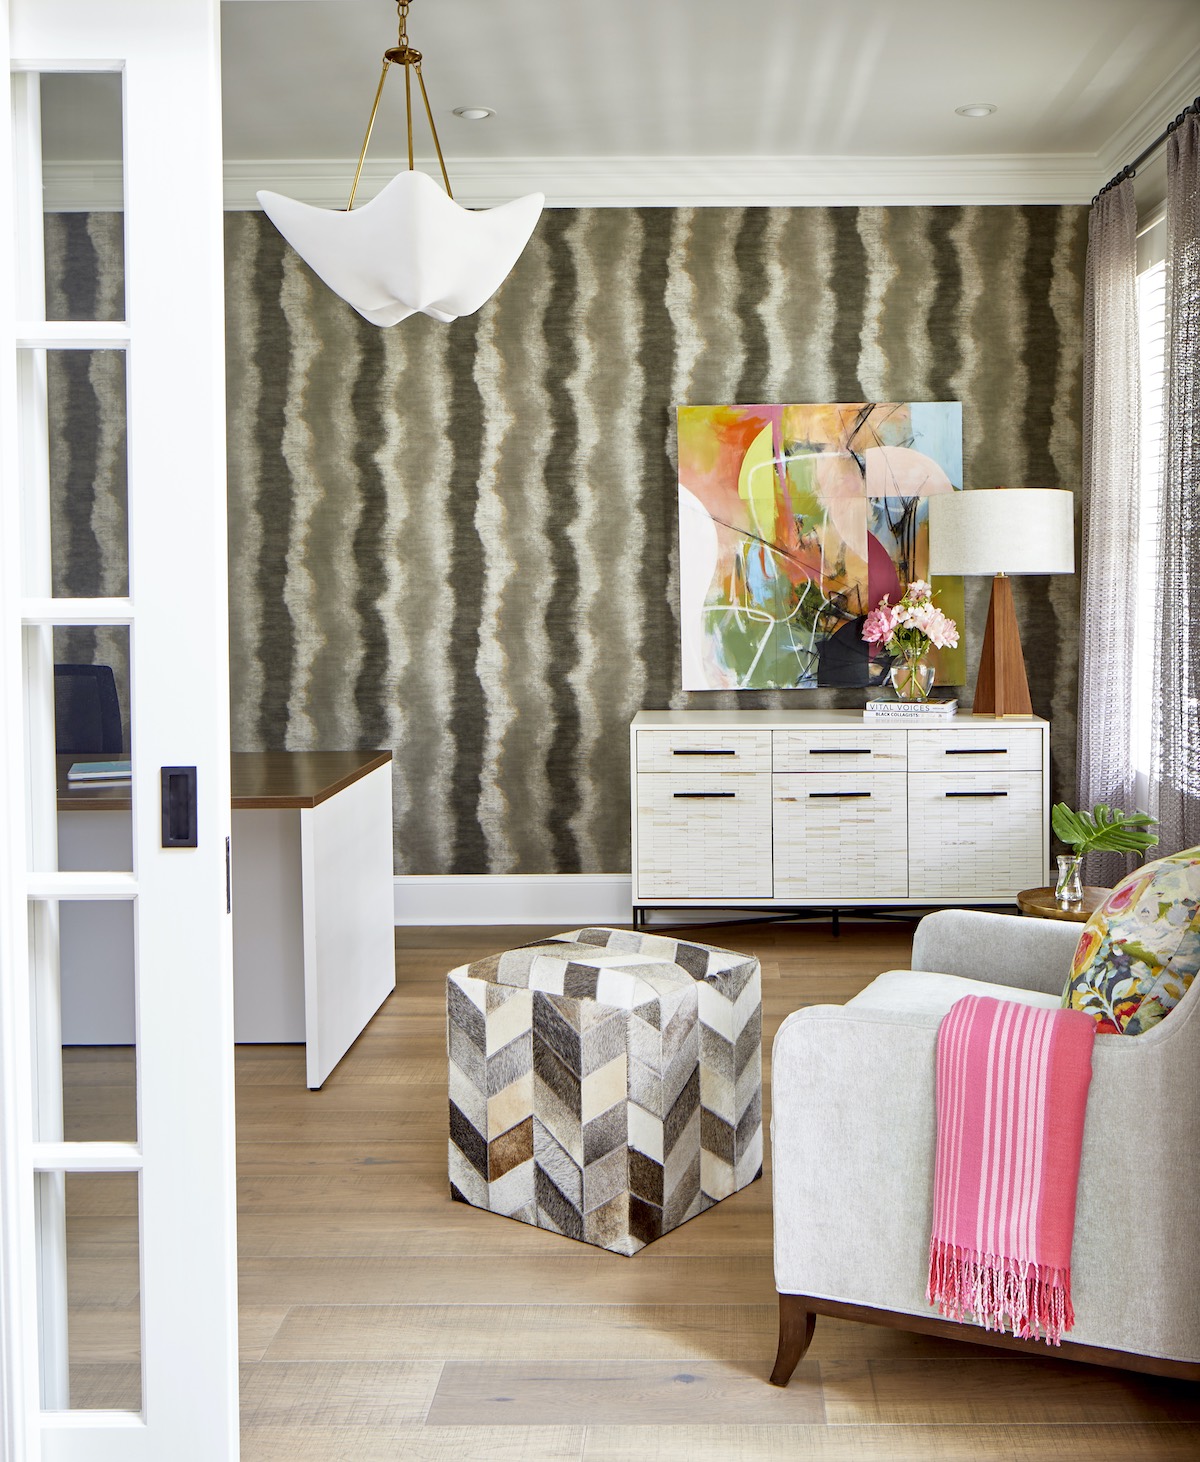 Neutral furniture complements a room with striped wallpaper.